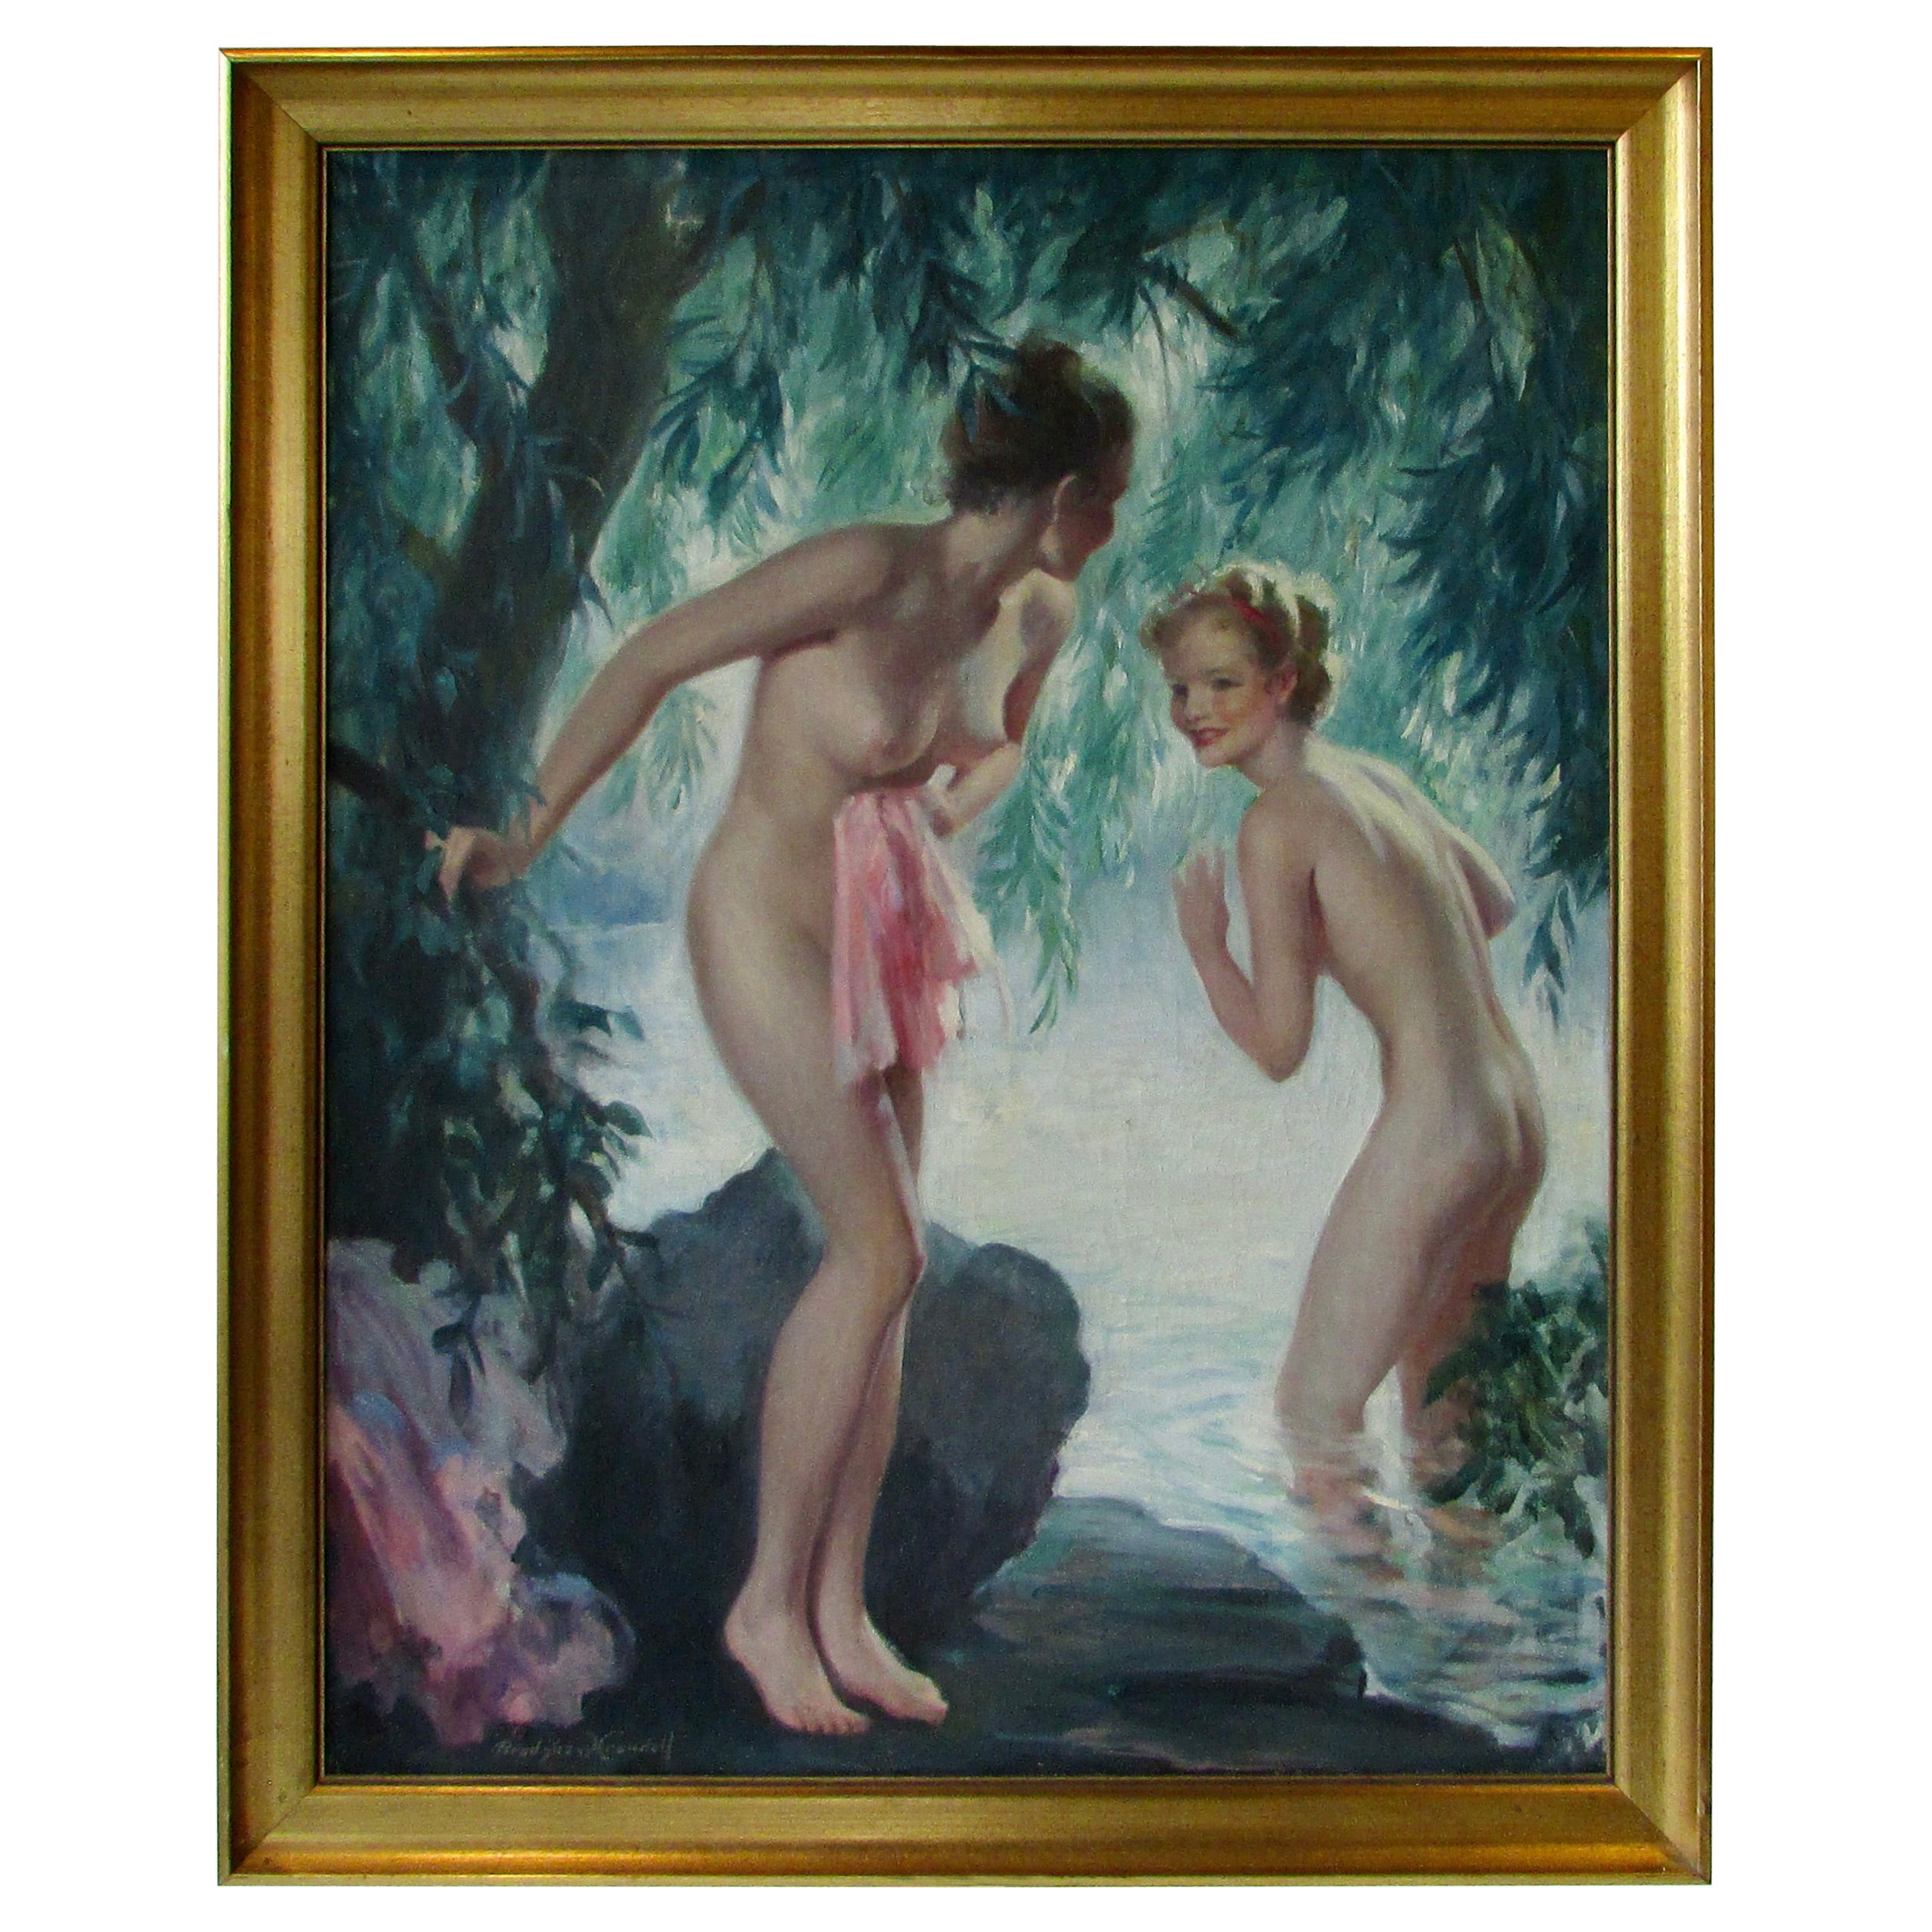 Bradshaw Crandell Original Water Nymph Illustration Art for Iodent Toothpaste For Sale